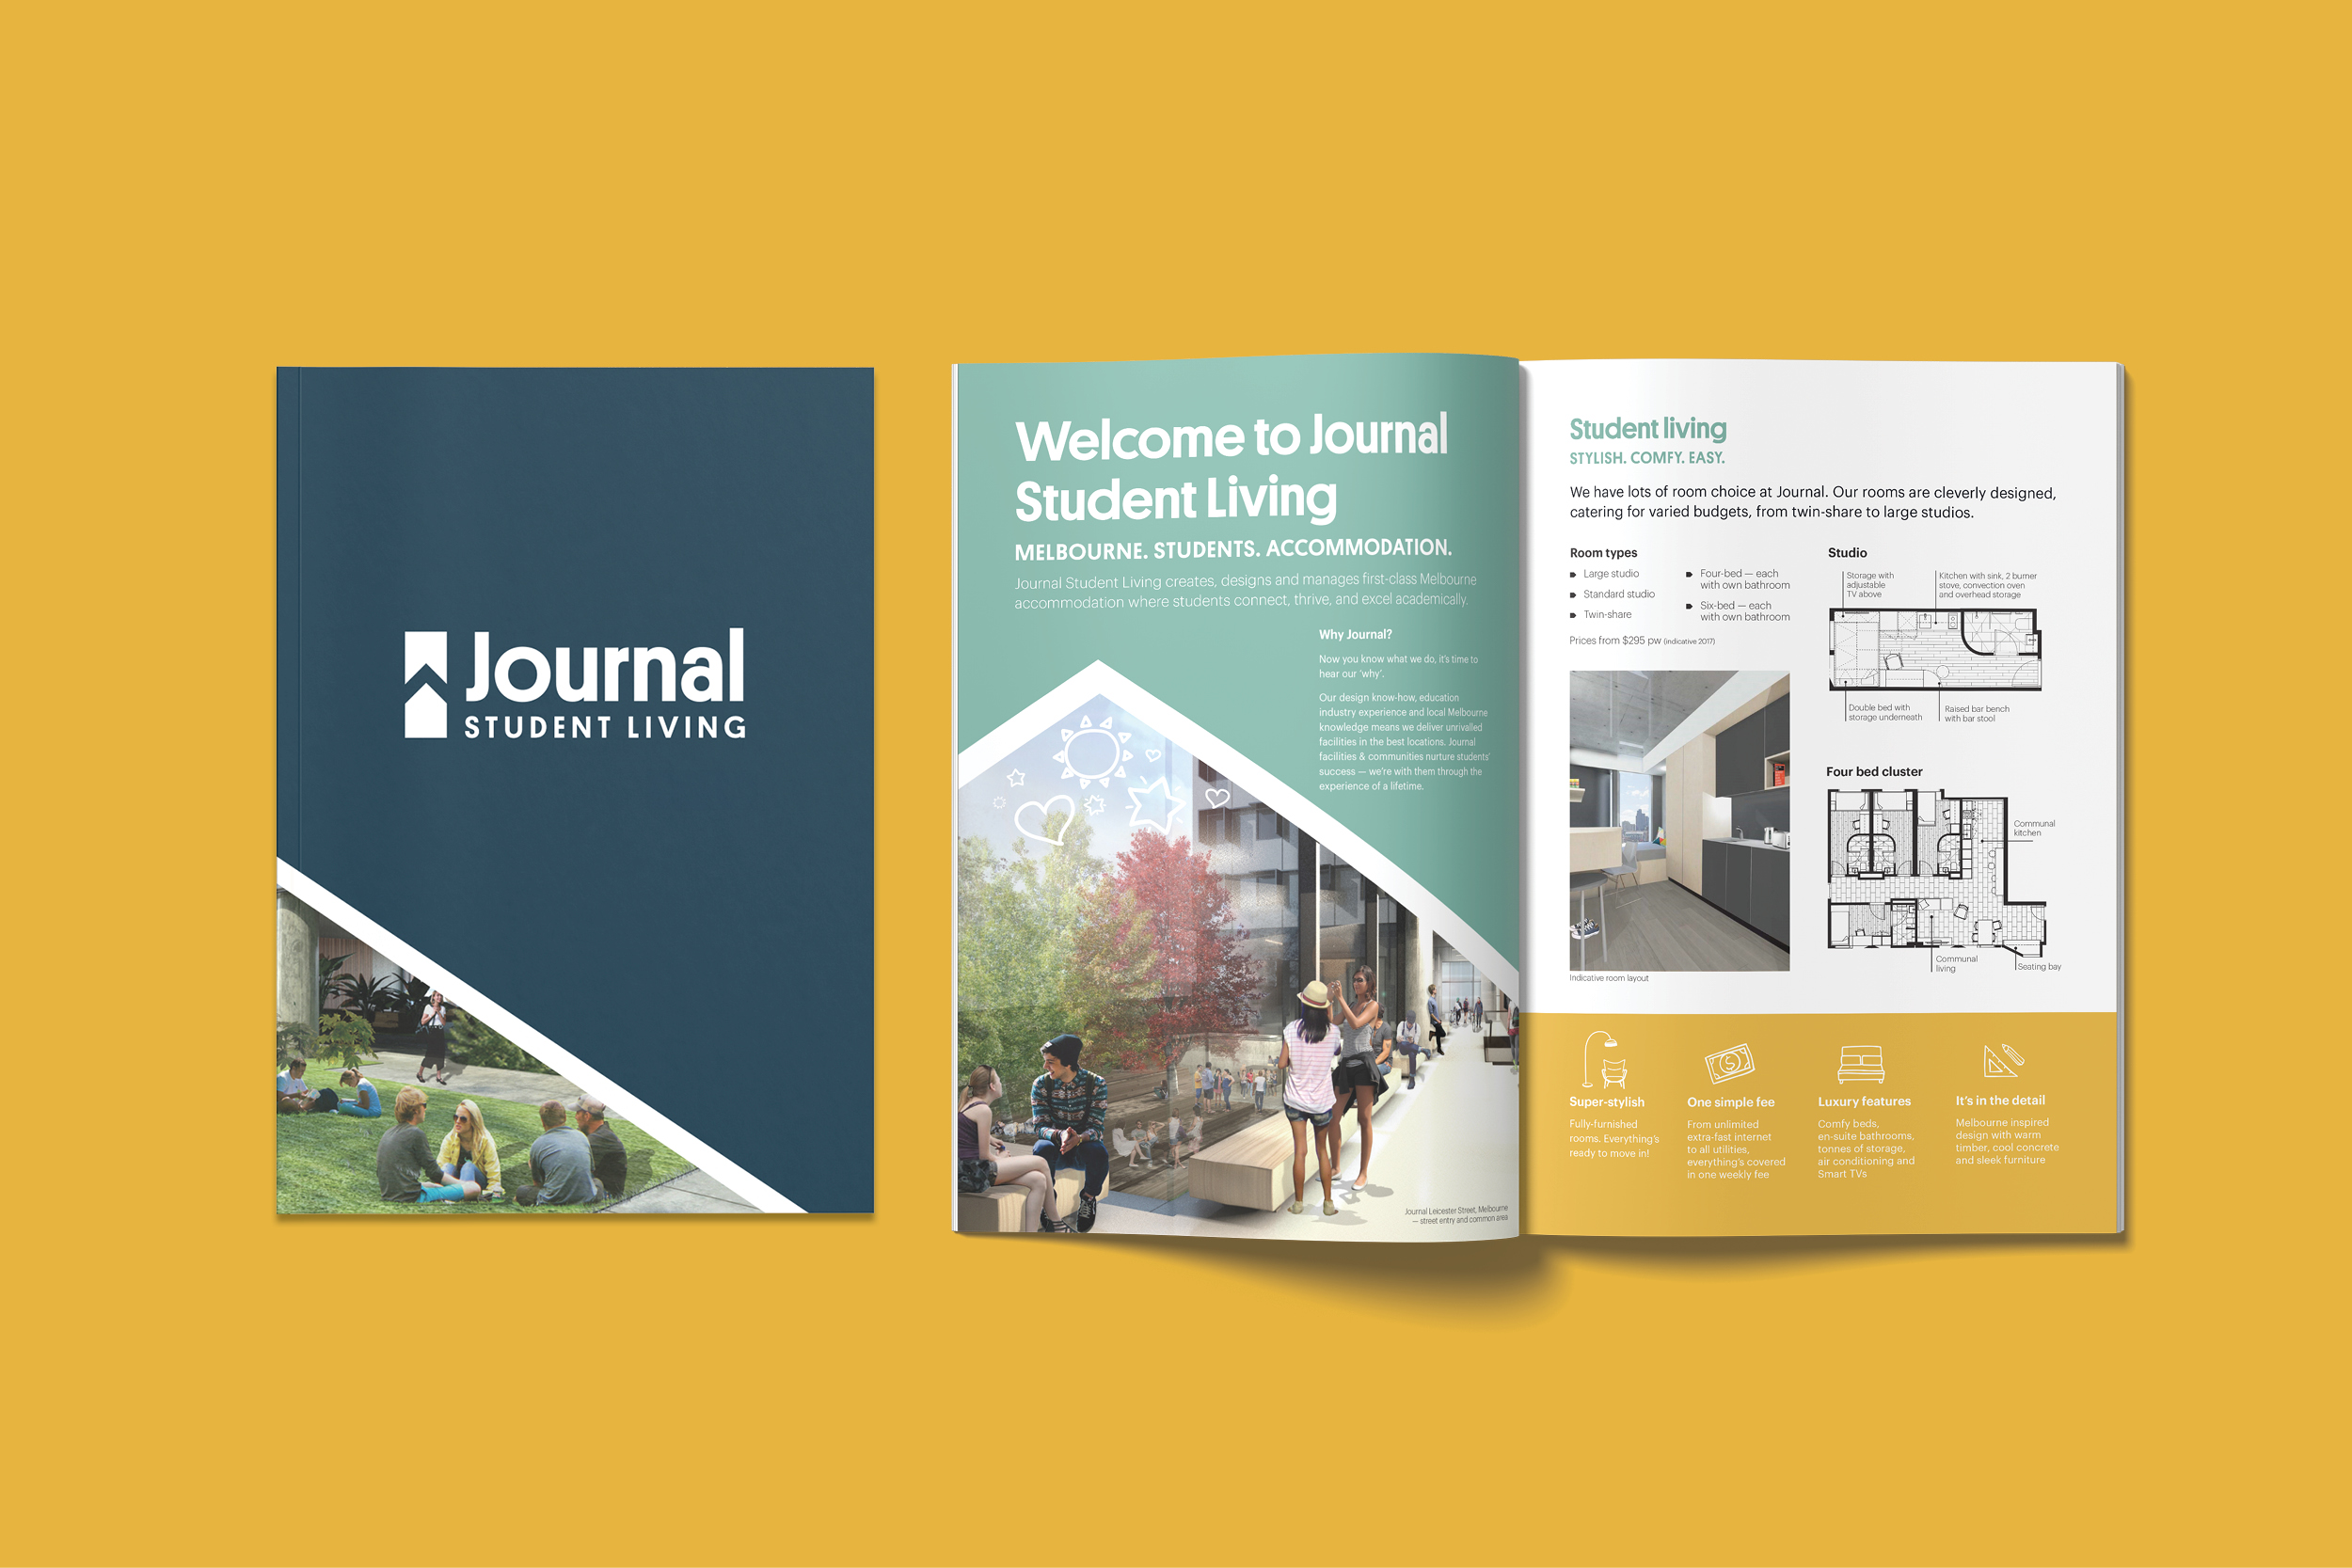 Journal Student Living information booklet, designed by MOO Marketing & Design's graphic designers in Melbourne